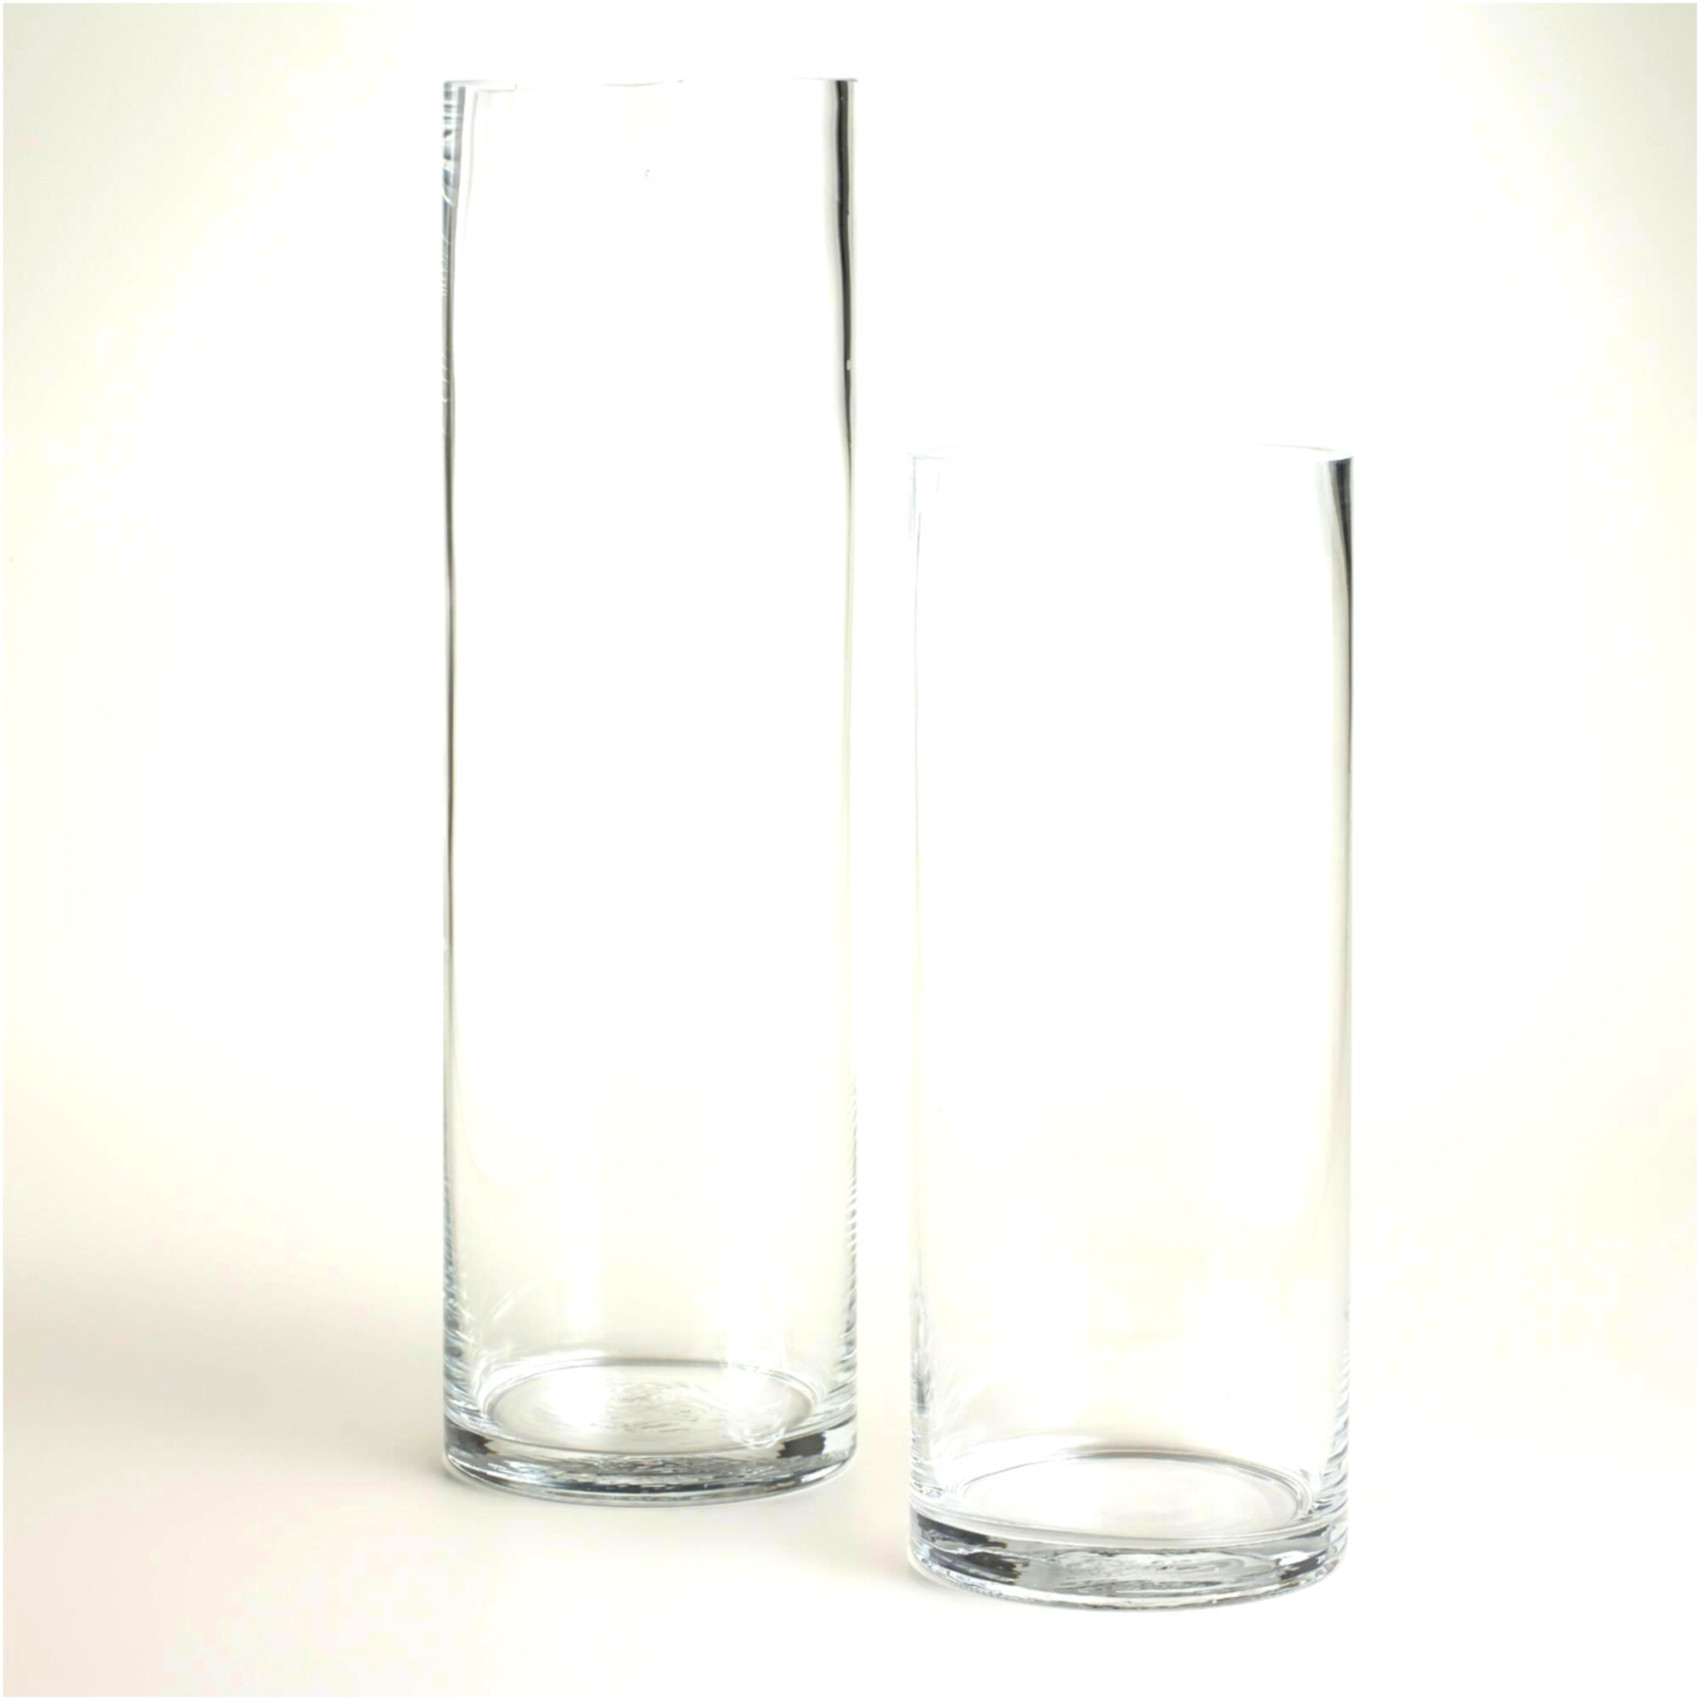 24 inch trumpet vases wholesale of why you should not go to glass vases wholesale glass vases with regard to crystal glass vases wholesale inspirational 30 elegant vases with